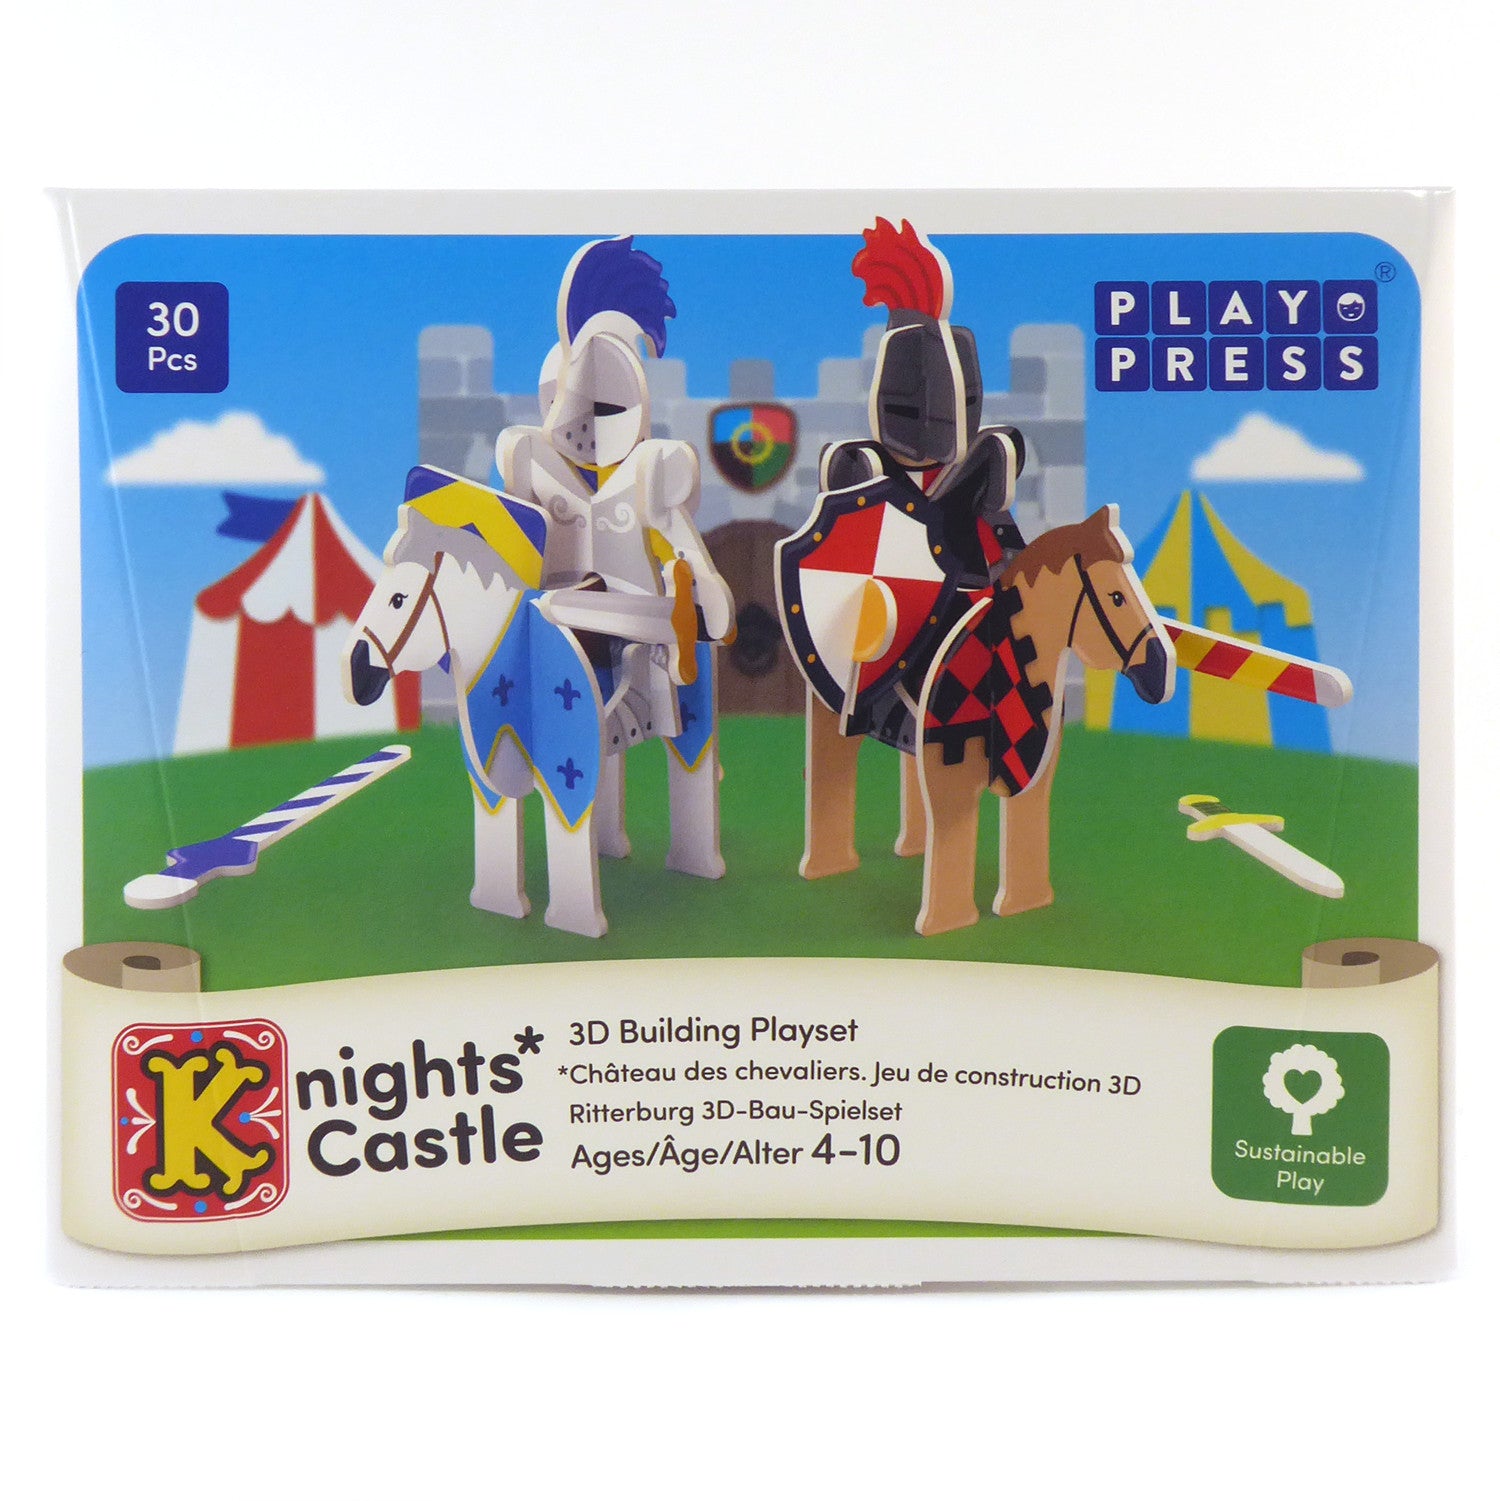 PlayPress Knights Castle Pop Out Playset